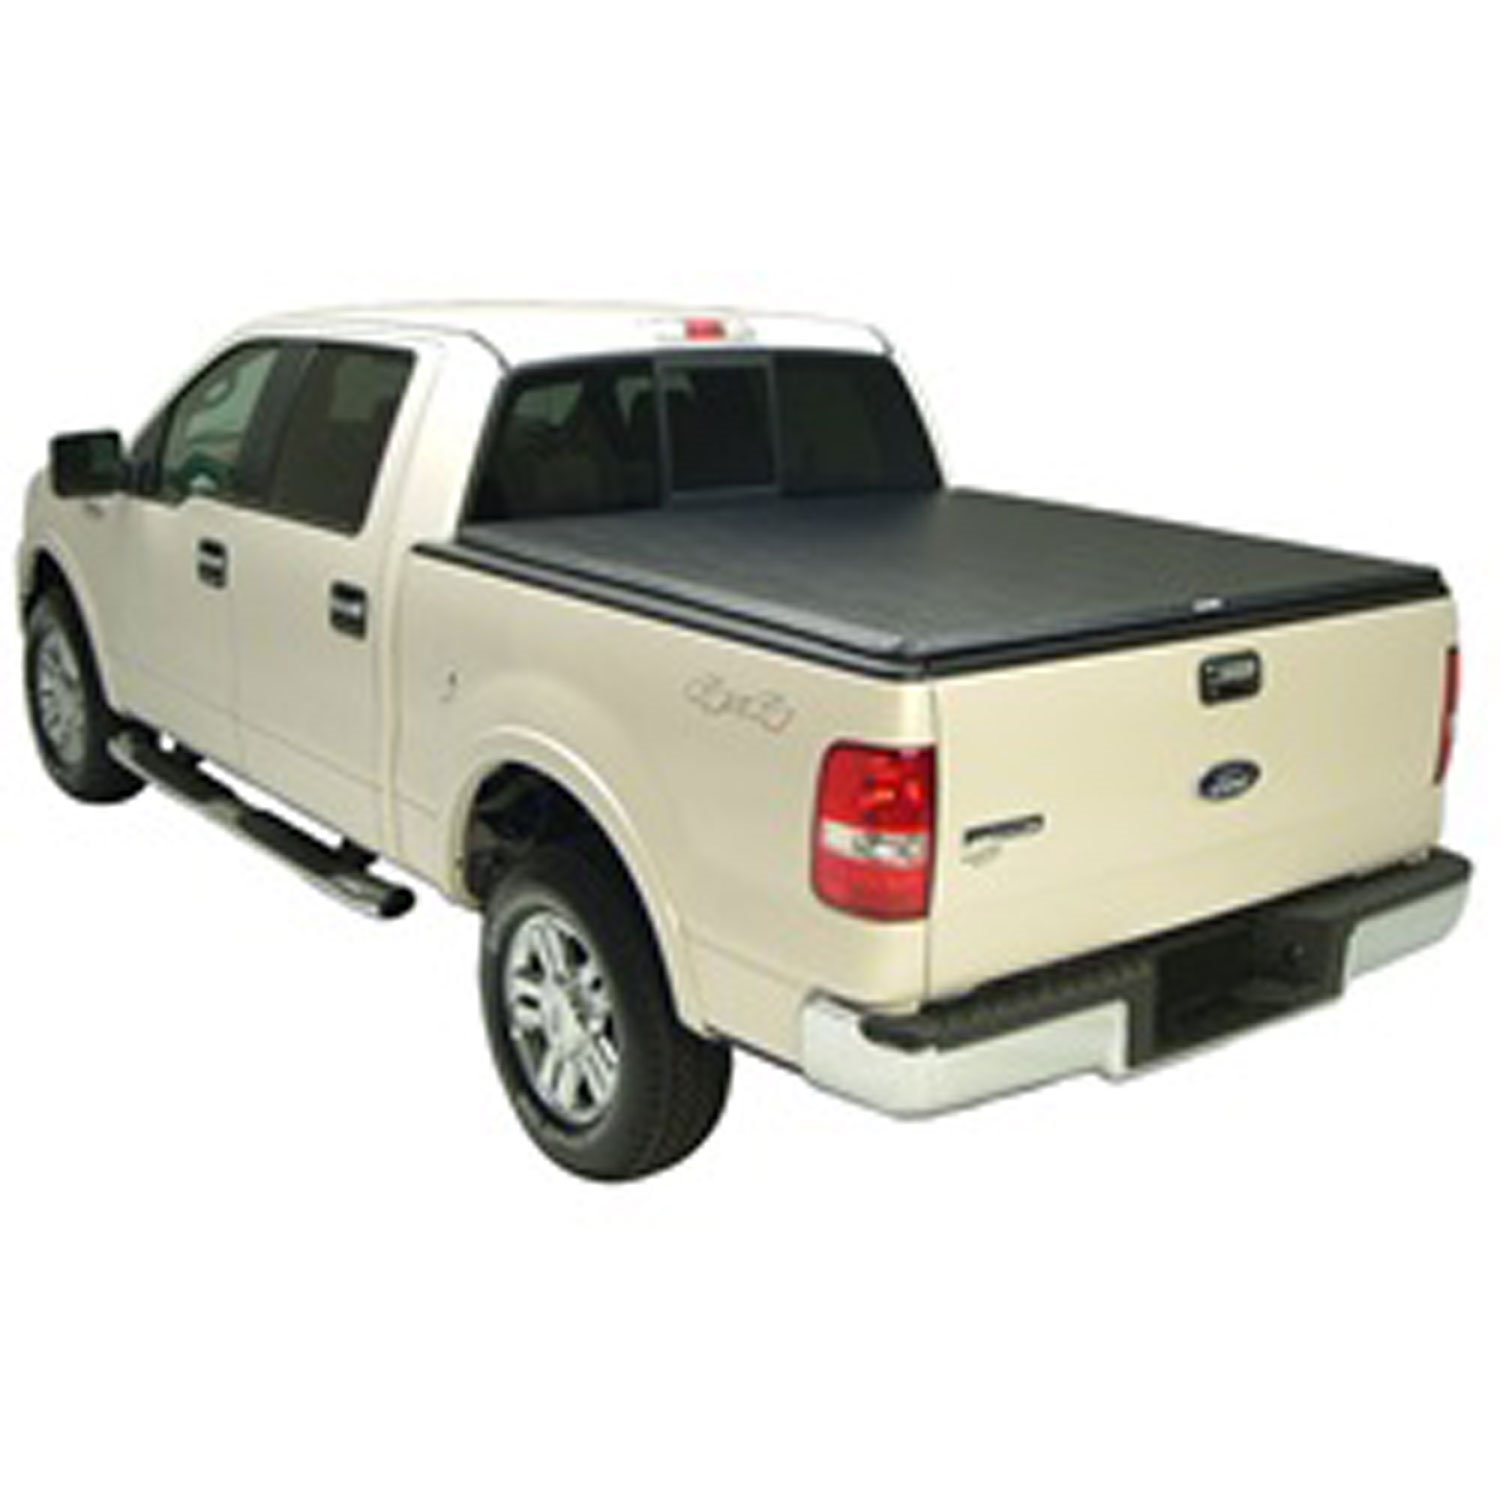 TruXport Soft Roll-Up Tonneau Cover for Ford F150 (Includes Lightning) with 5' 7" Extra Short Bed